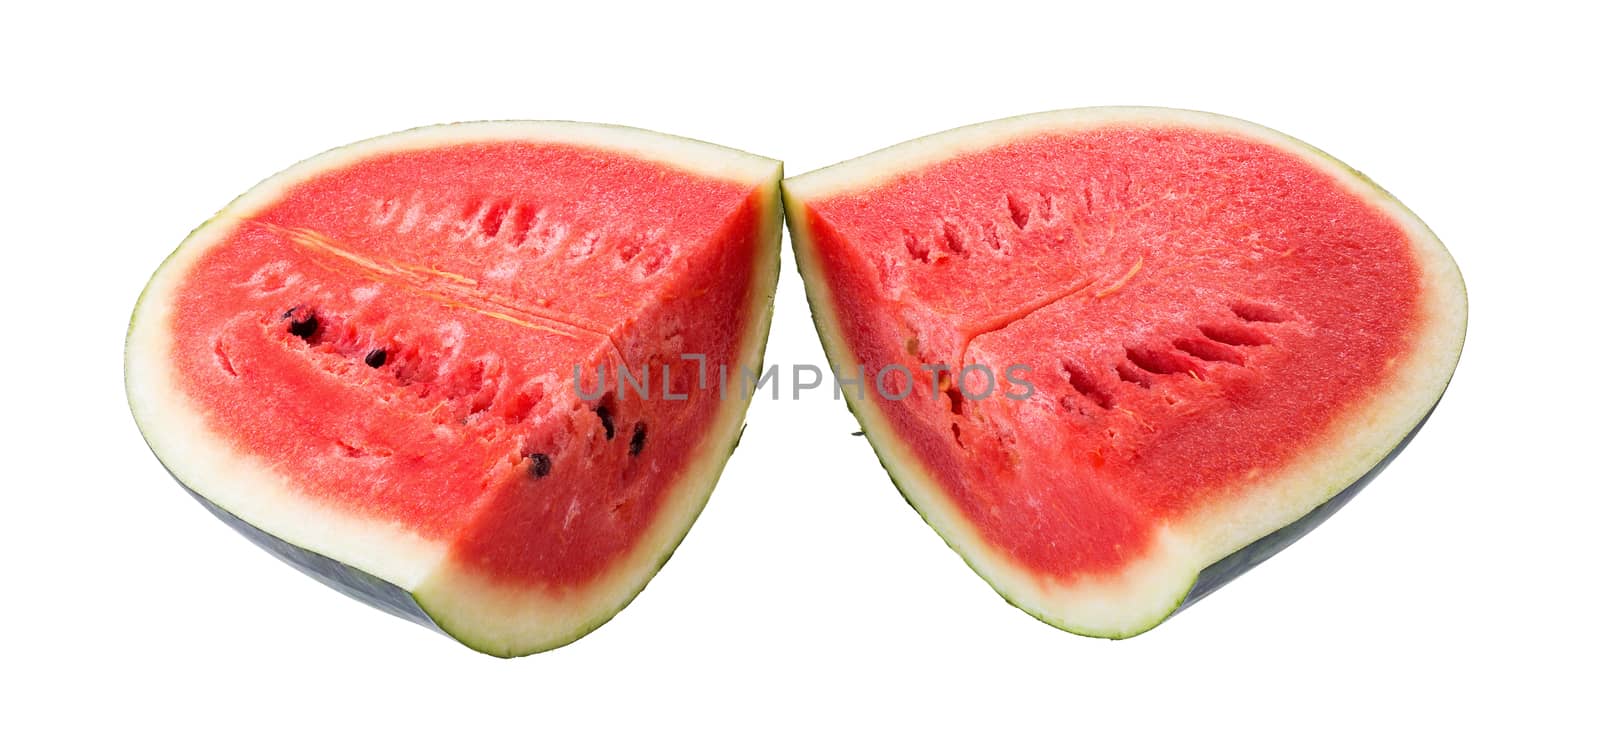 juicy slice of watermelon on a white background by kaiskynet